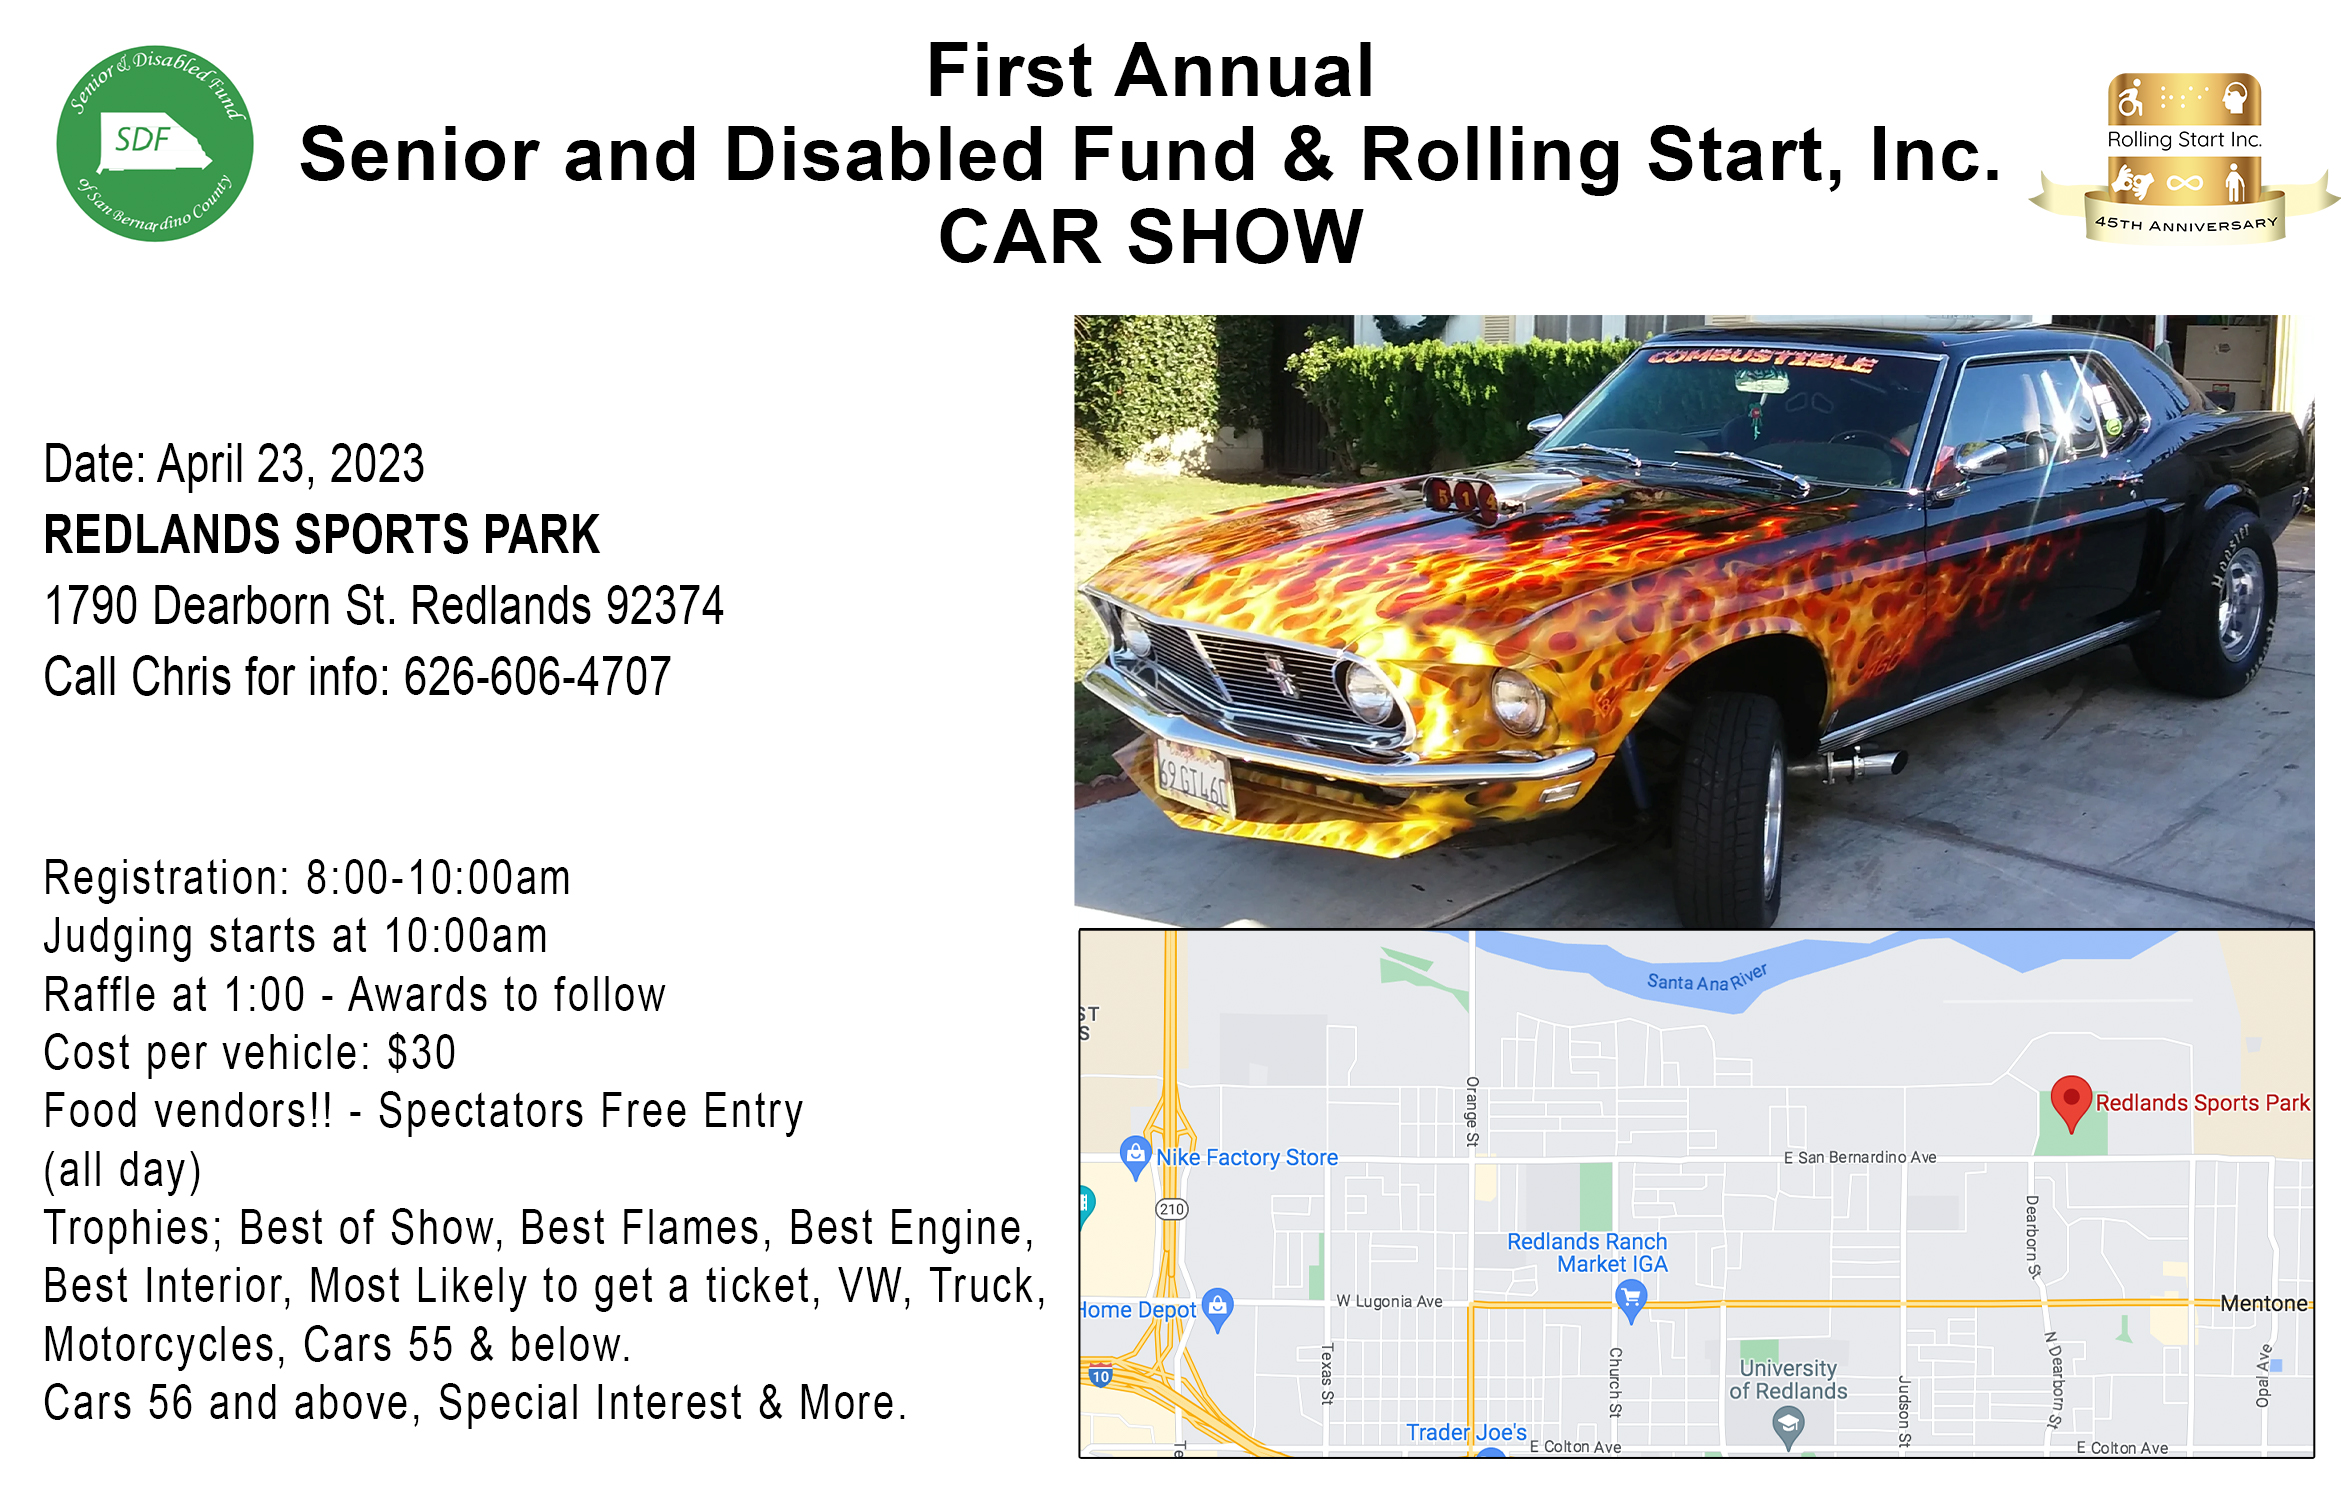 First Annual Senior and Disabled Fund & Rolling Start, Inc. CAR SHOW Date: April 23, 2023 REDLANDS SPORTS PARK 1790 Dearborn St. Redlands 92374 Call Chris for info: 626-606-4707 Registration: 8:00-10:00am Judging starts at 10:00am Raffle at 1:00 - Awards to follow Cost per vehicle: $30 Food vendors!! - Spectators Free Entry (all day) Trophies; Best of Show, Best Flames, Best Engine, Best Interior, Most Likely to get a ticket, VW, Truck, Motorcycles, Cars 55 & below.Cars 56 and above, Special Interest & More.